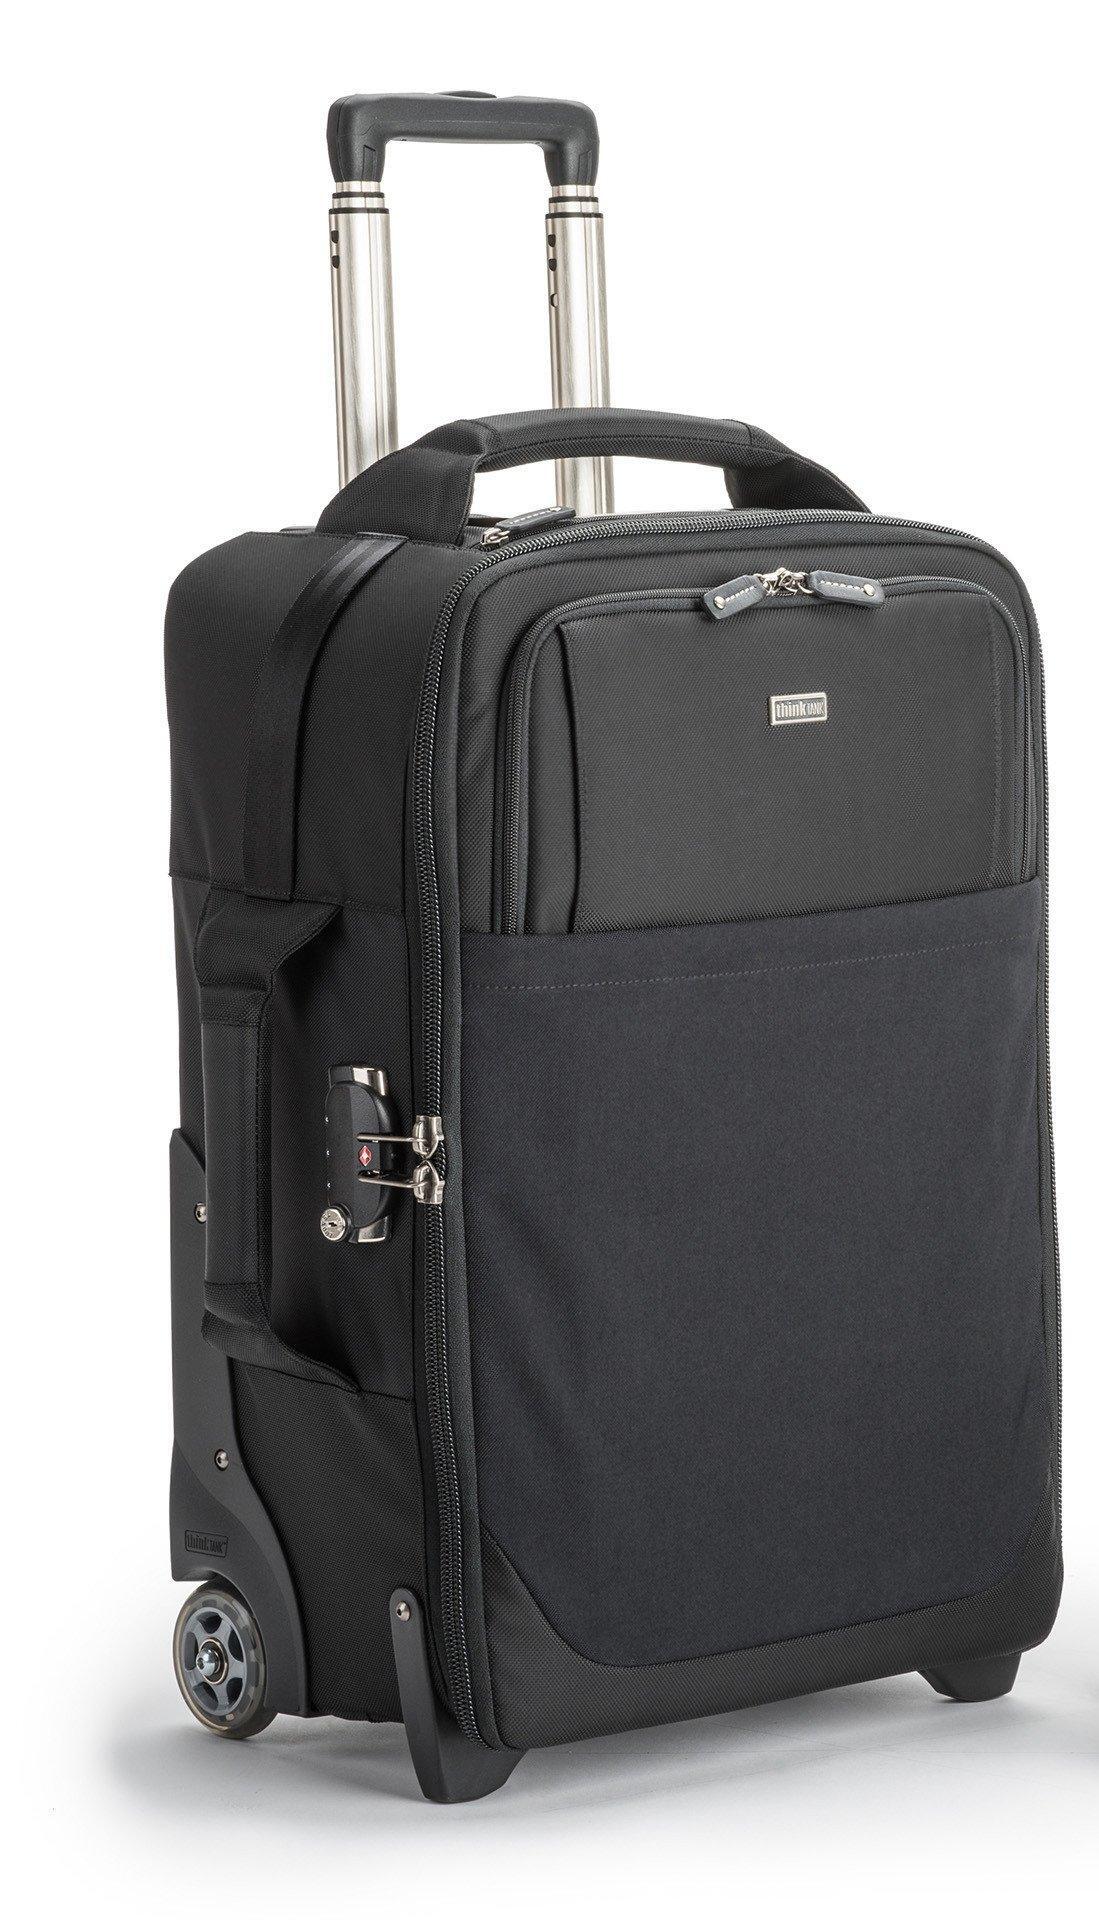 ThinkTankPhoto Airport Security V3.0